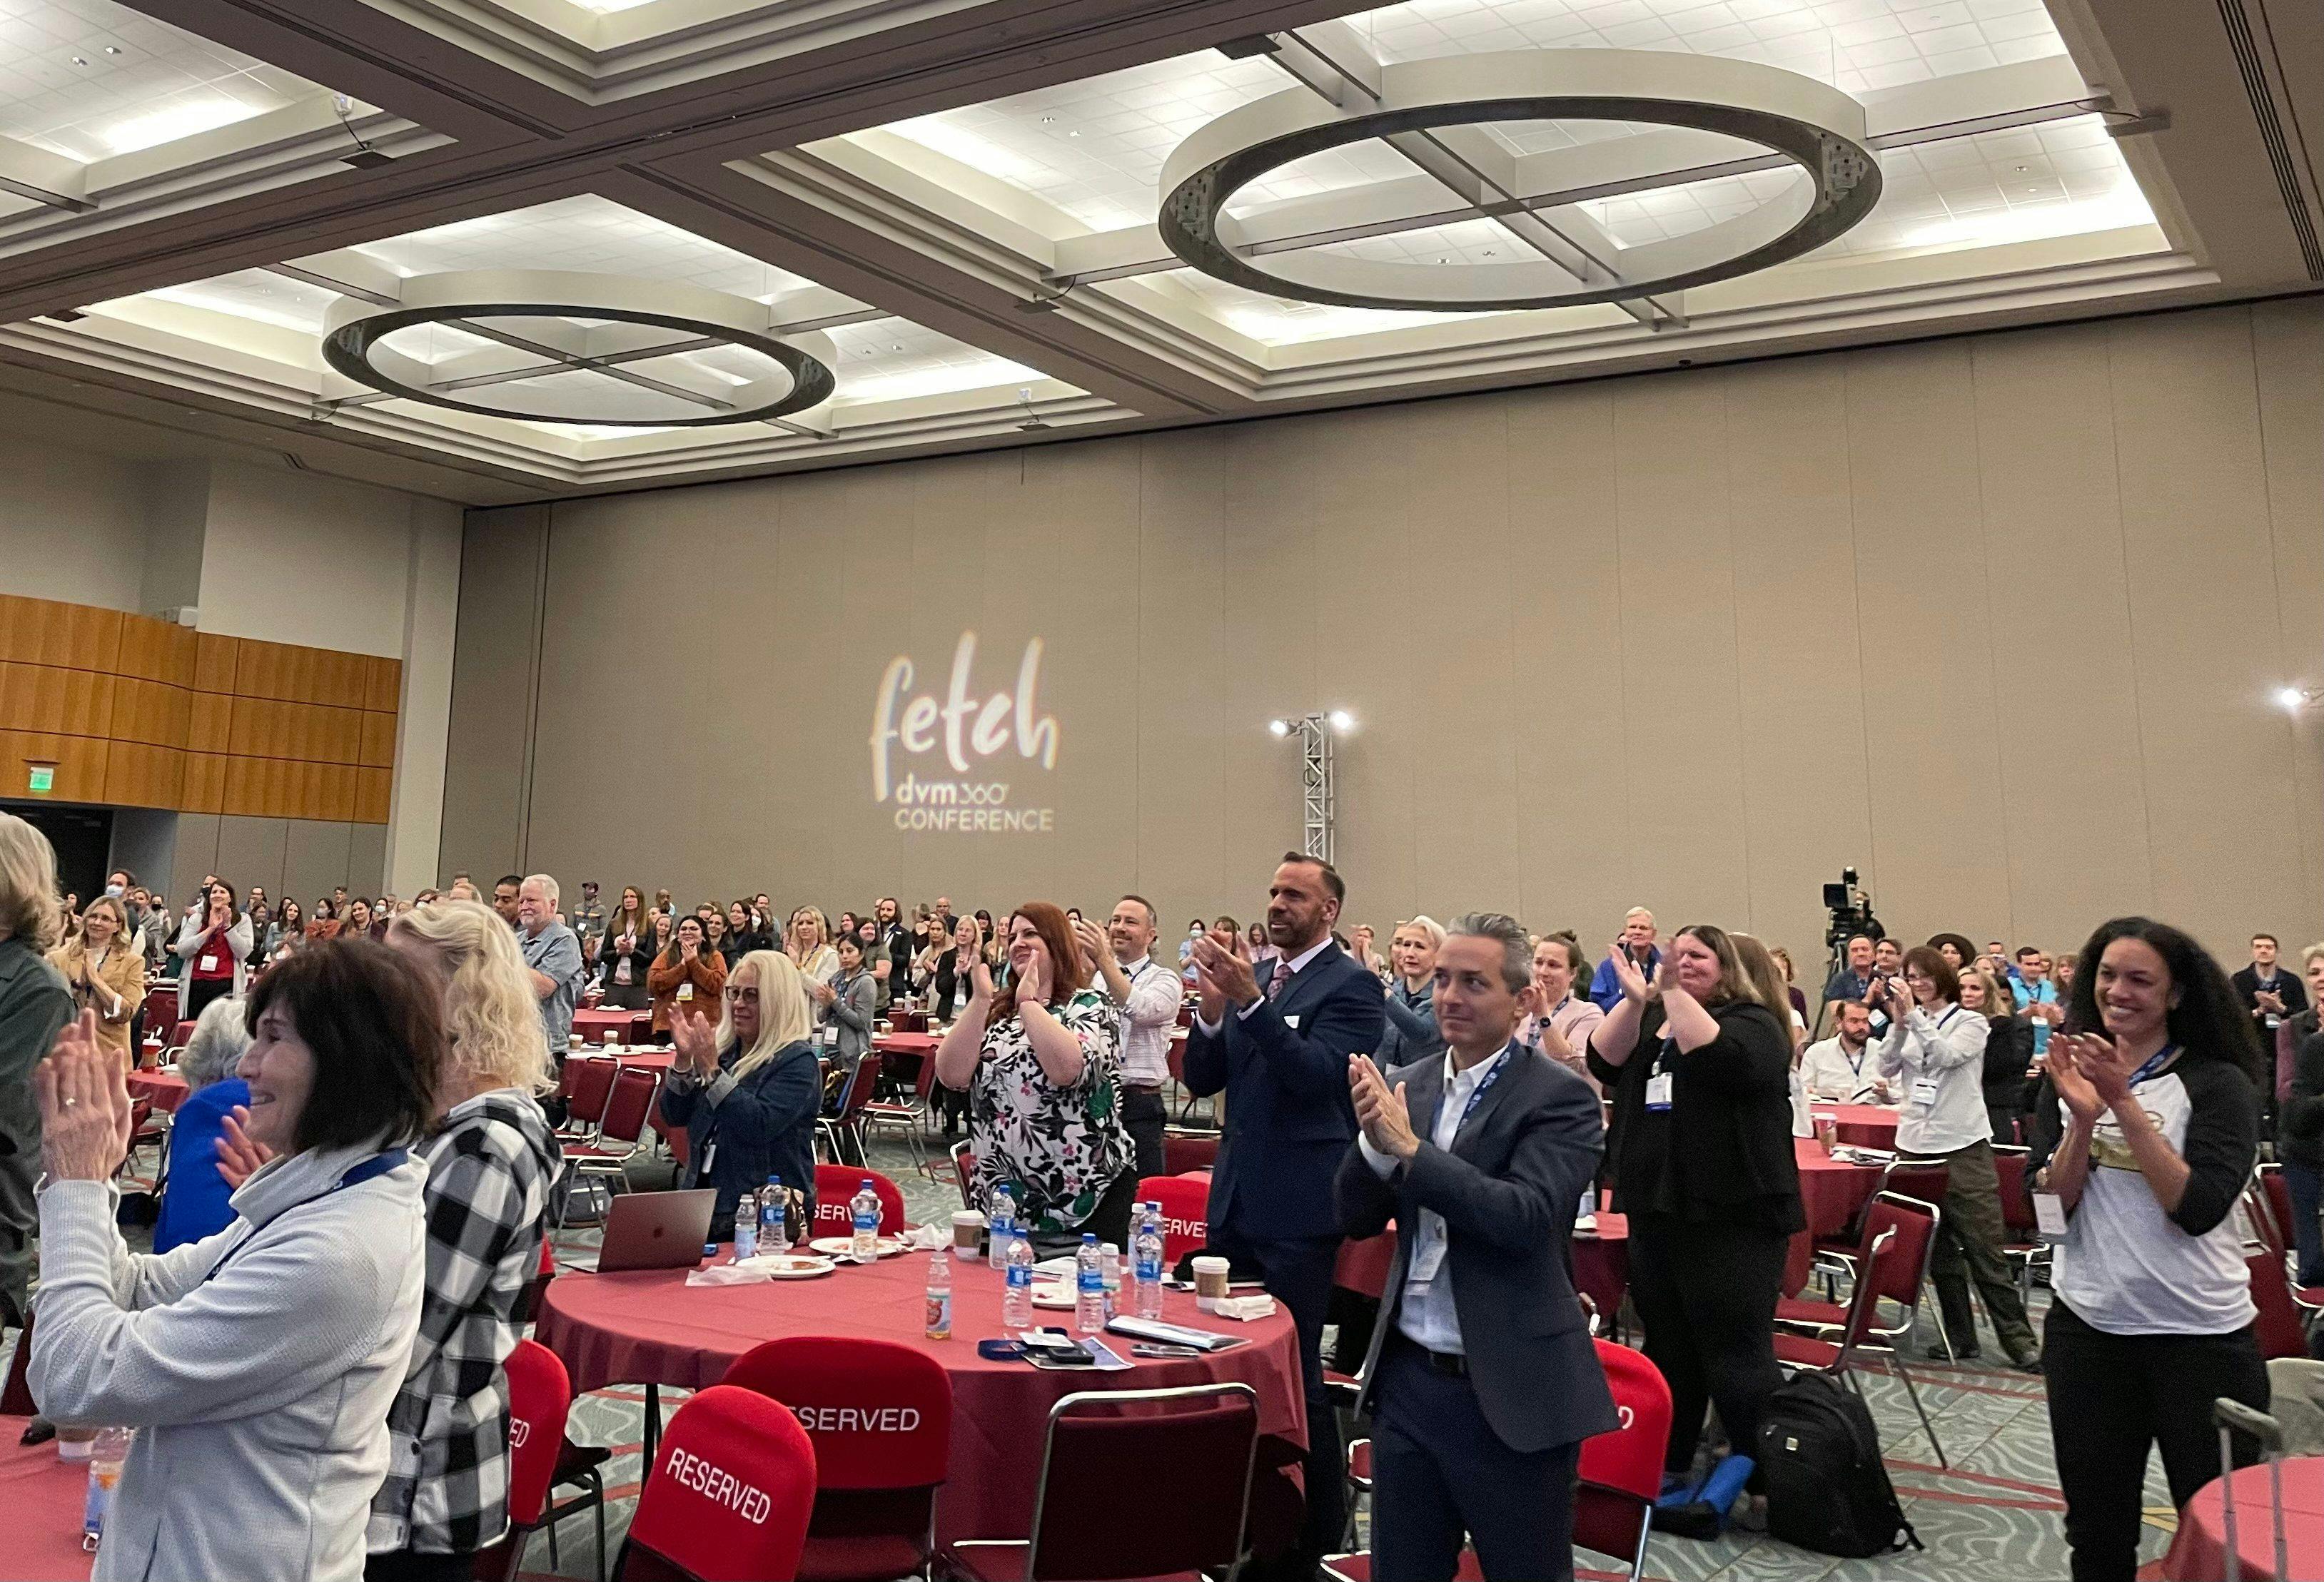 Credit: Caitlin McCafferty

Mark Goldstein, DVM, receives a standing ovation at the conclusion of his keynote address at the Fetch dvm360® Conference in San Diego.